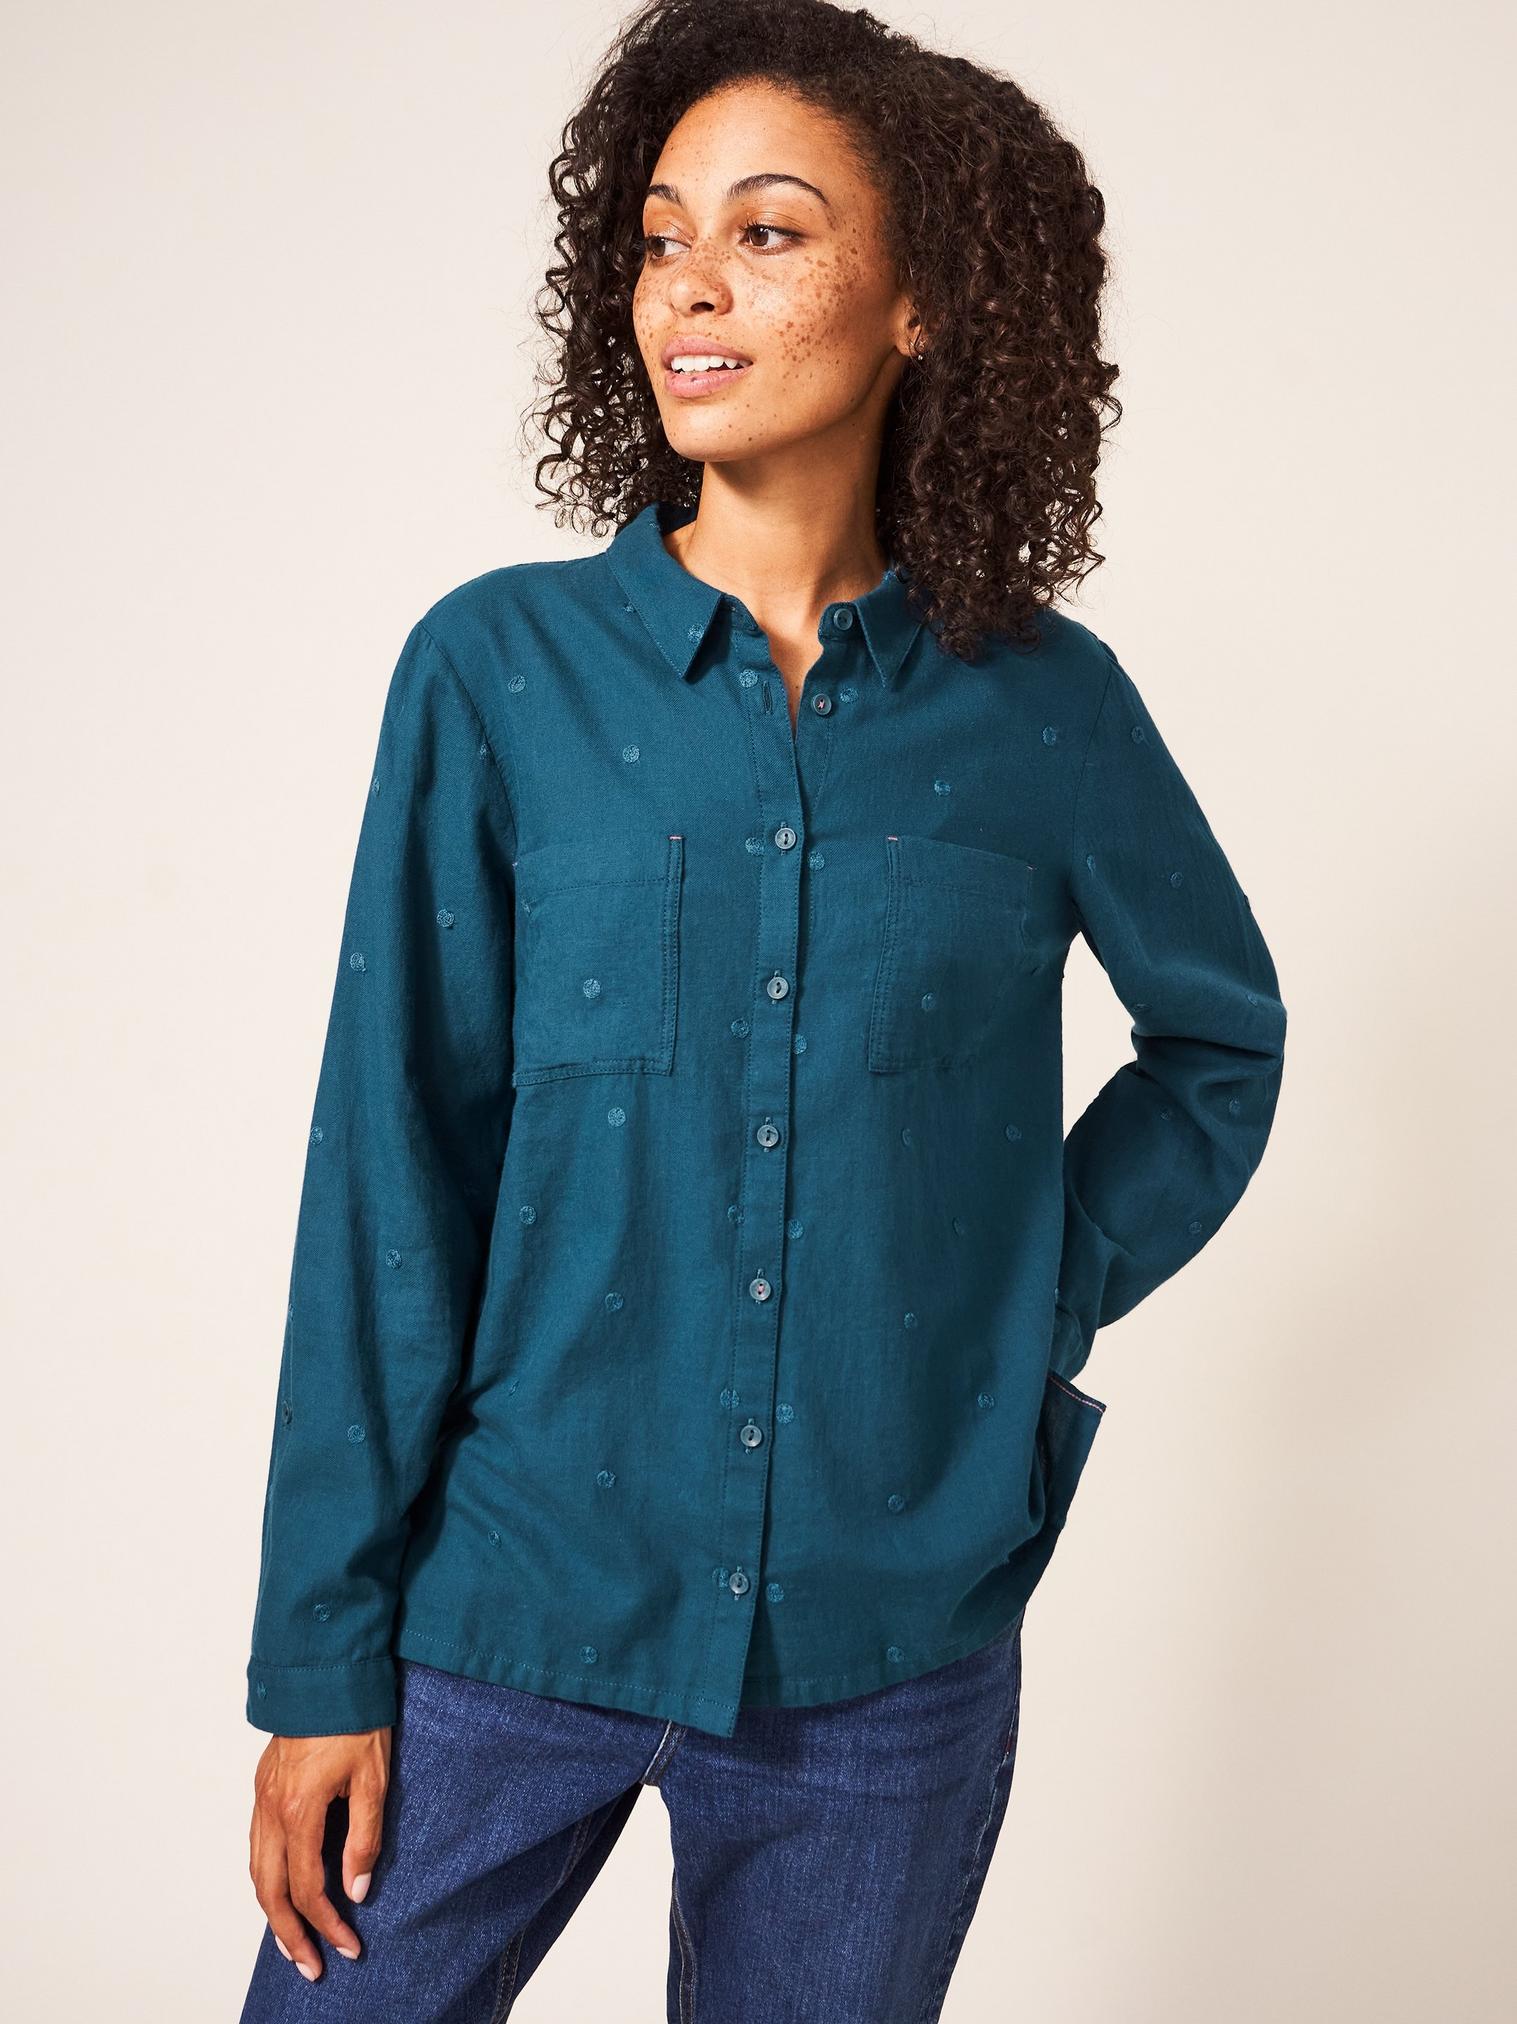 Emilia Organic Cotton Long Sleeve Shirt in TEAL MLT - LIFESTYLE